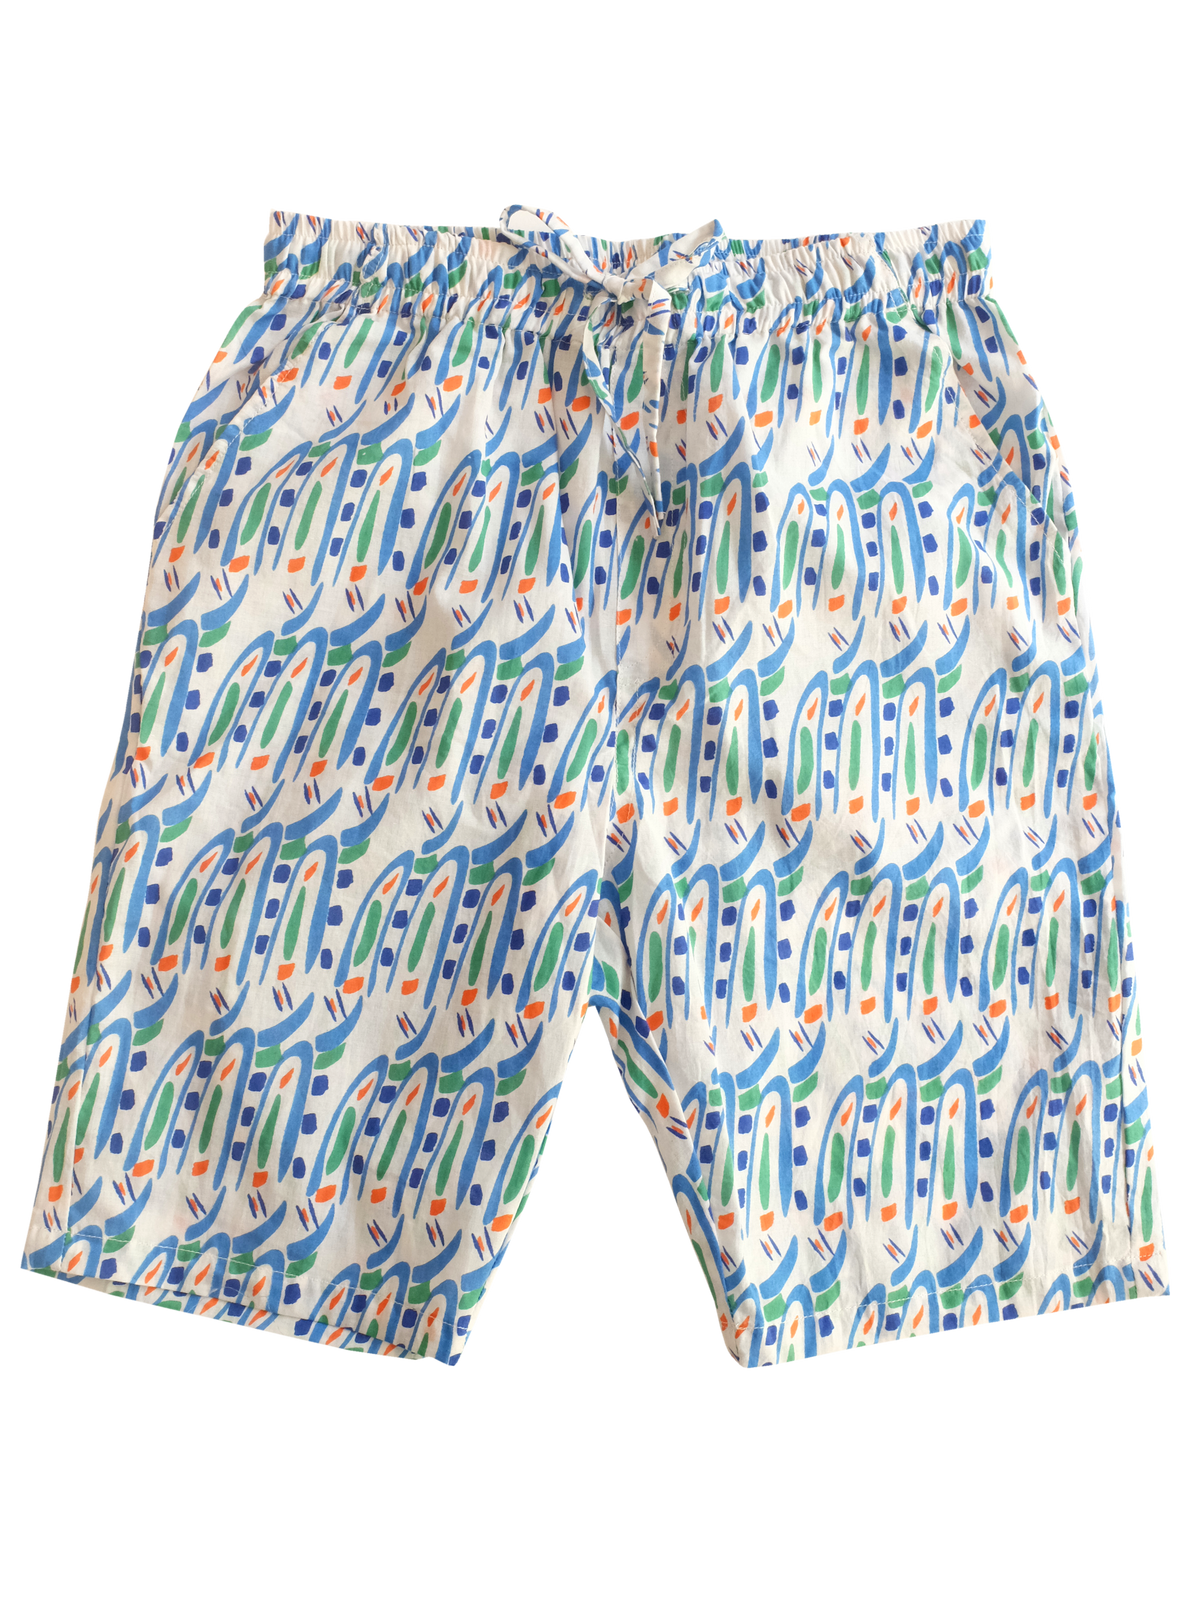 Kids shorts lightweight organic cotton in Hungry Bugs 2 - 12 yrs-Humphries and Begg